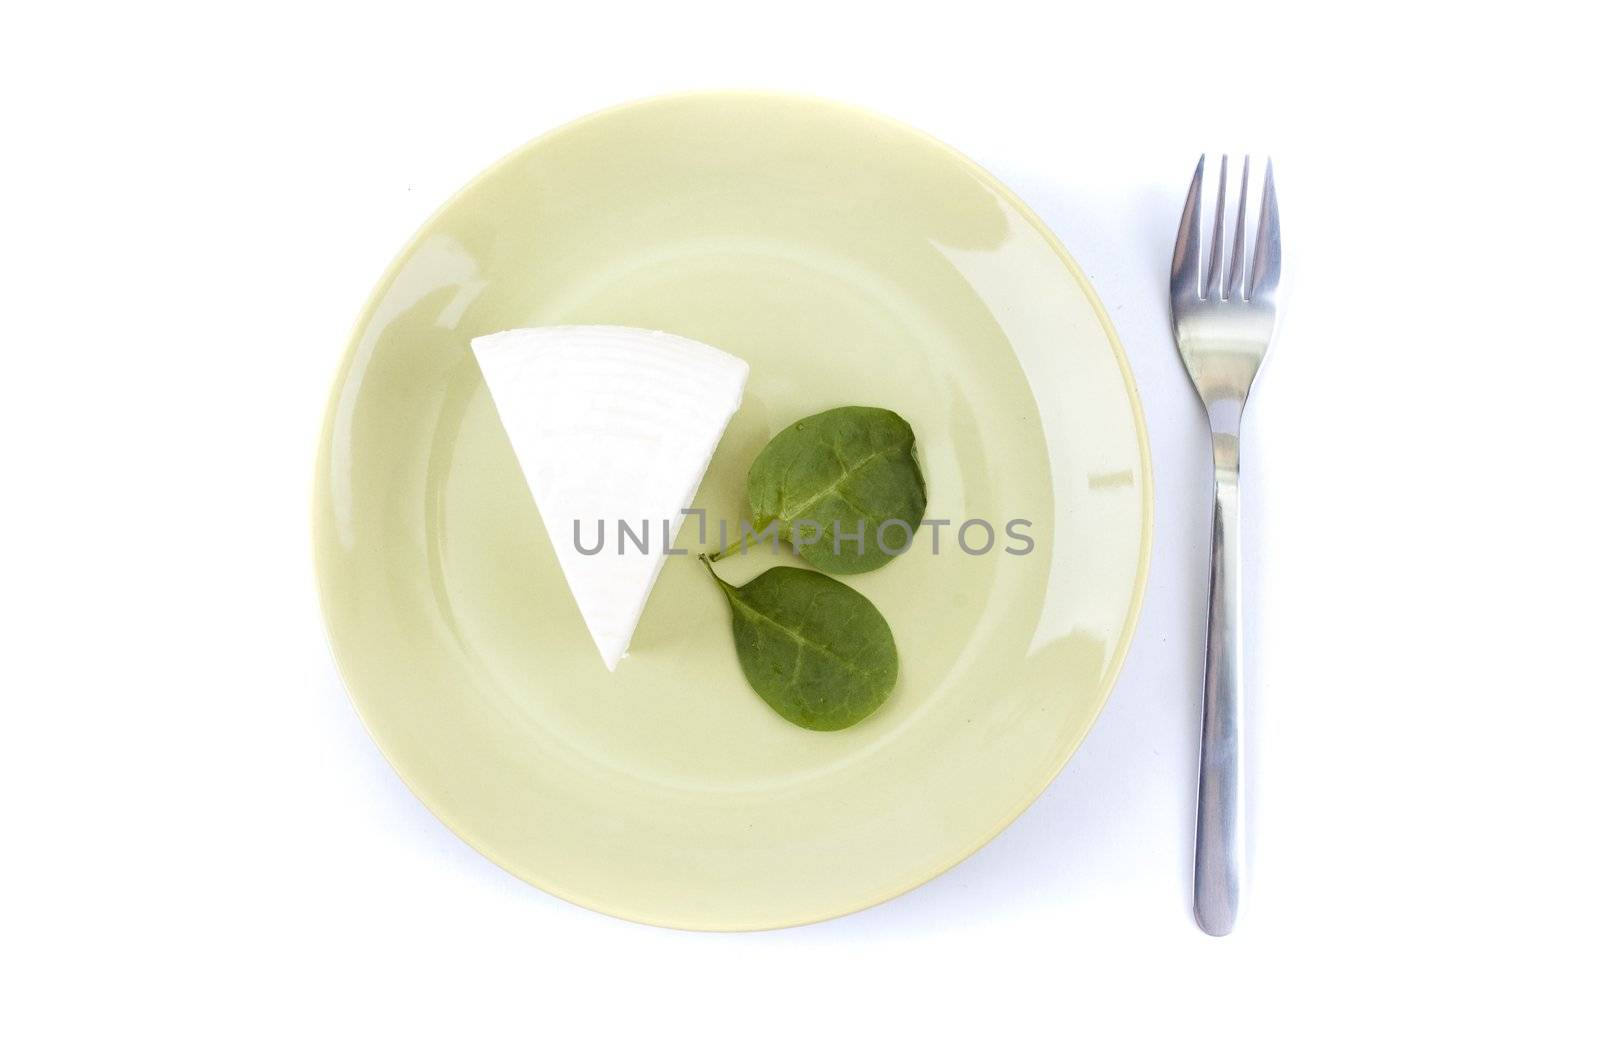 cheese and spinach on a green plate by Triphka